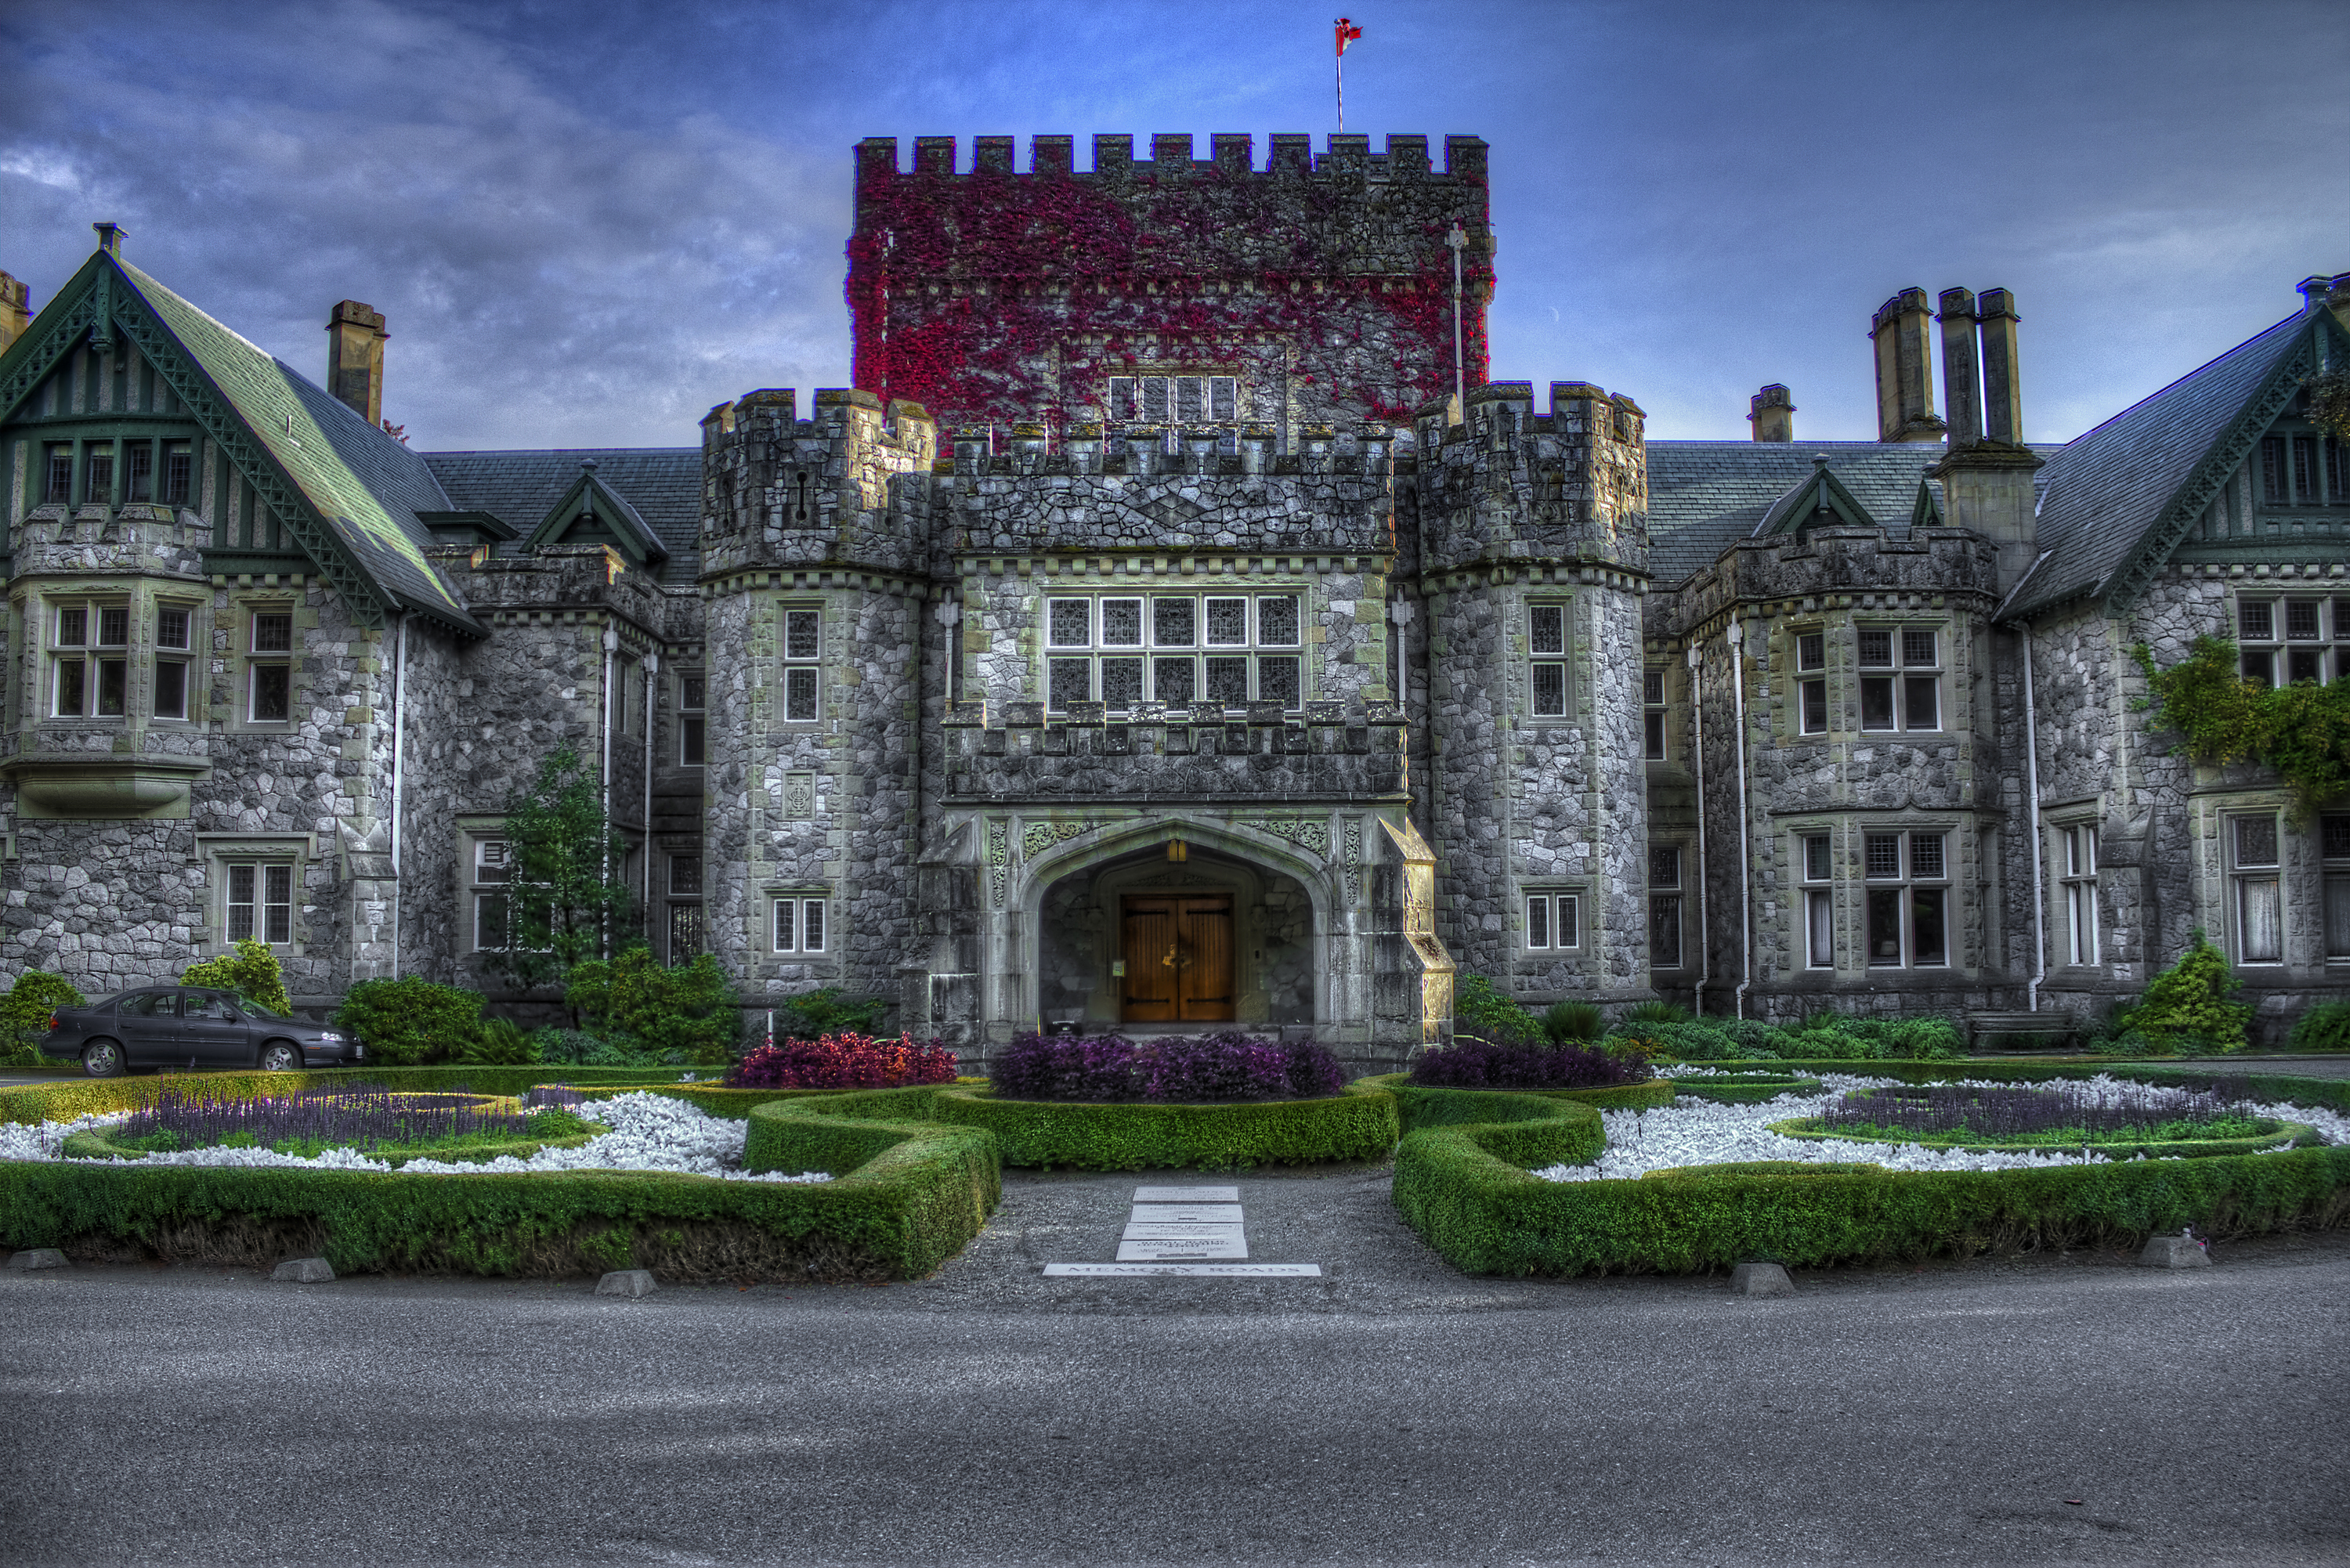 palaces, garden, canada, man made, palace, architecture 1080p